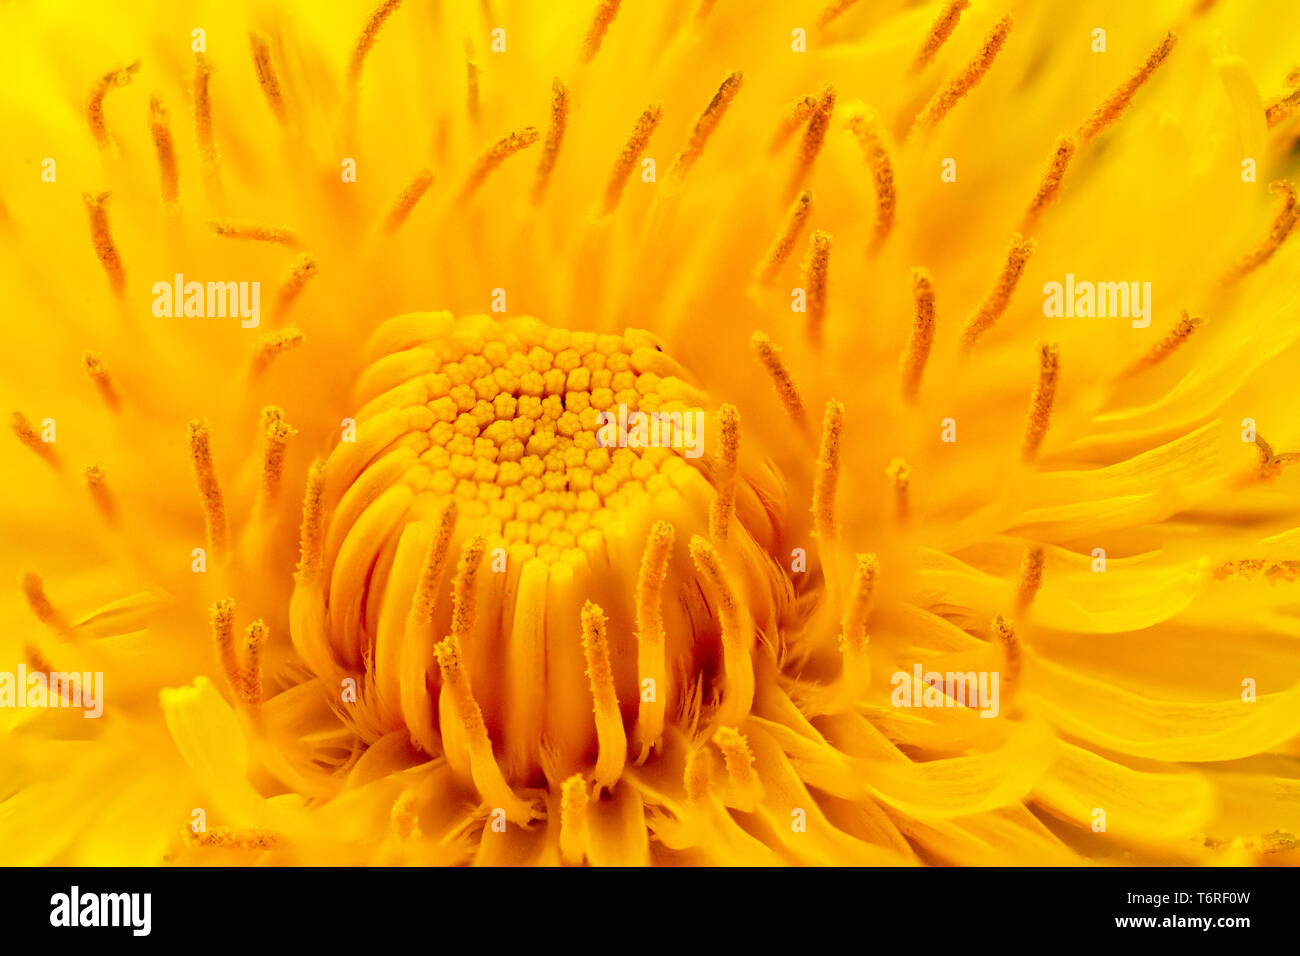 Extreme closeup view of the common dandelion flower Stock Photo